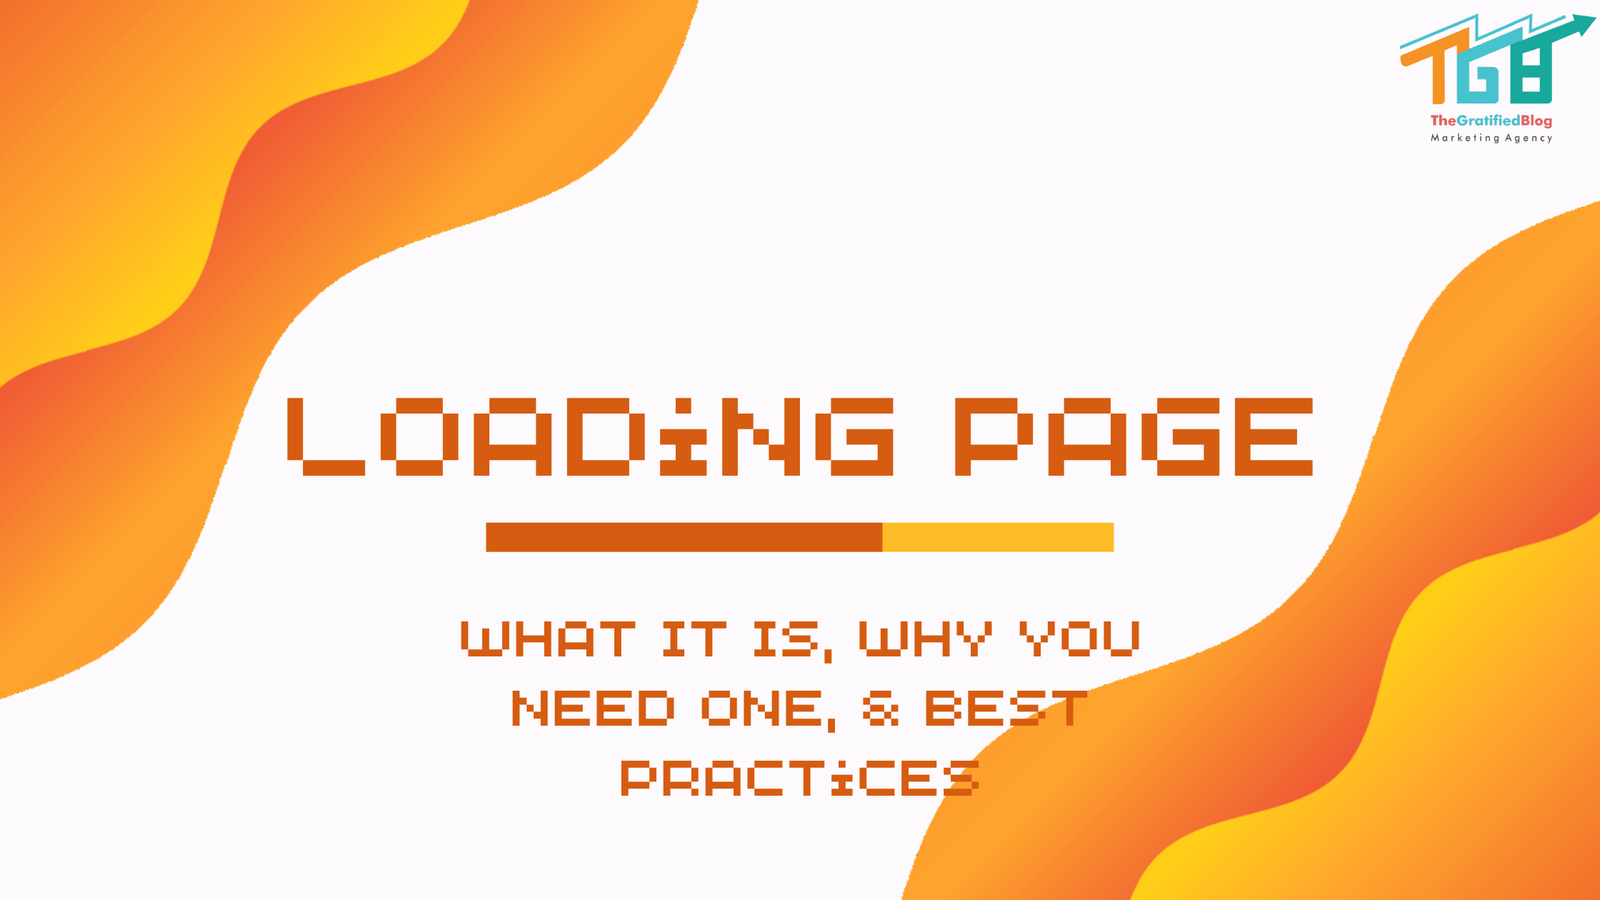 Loading Page: What It Is, Why You Need One, & Best Practices